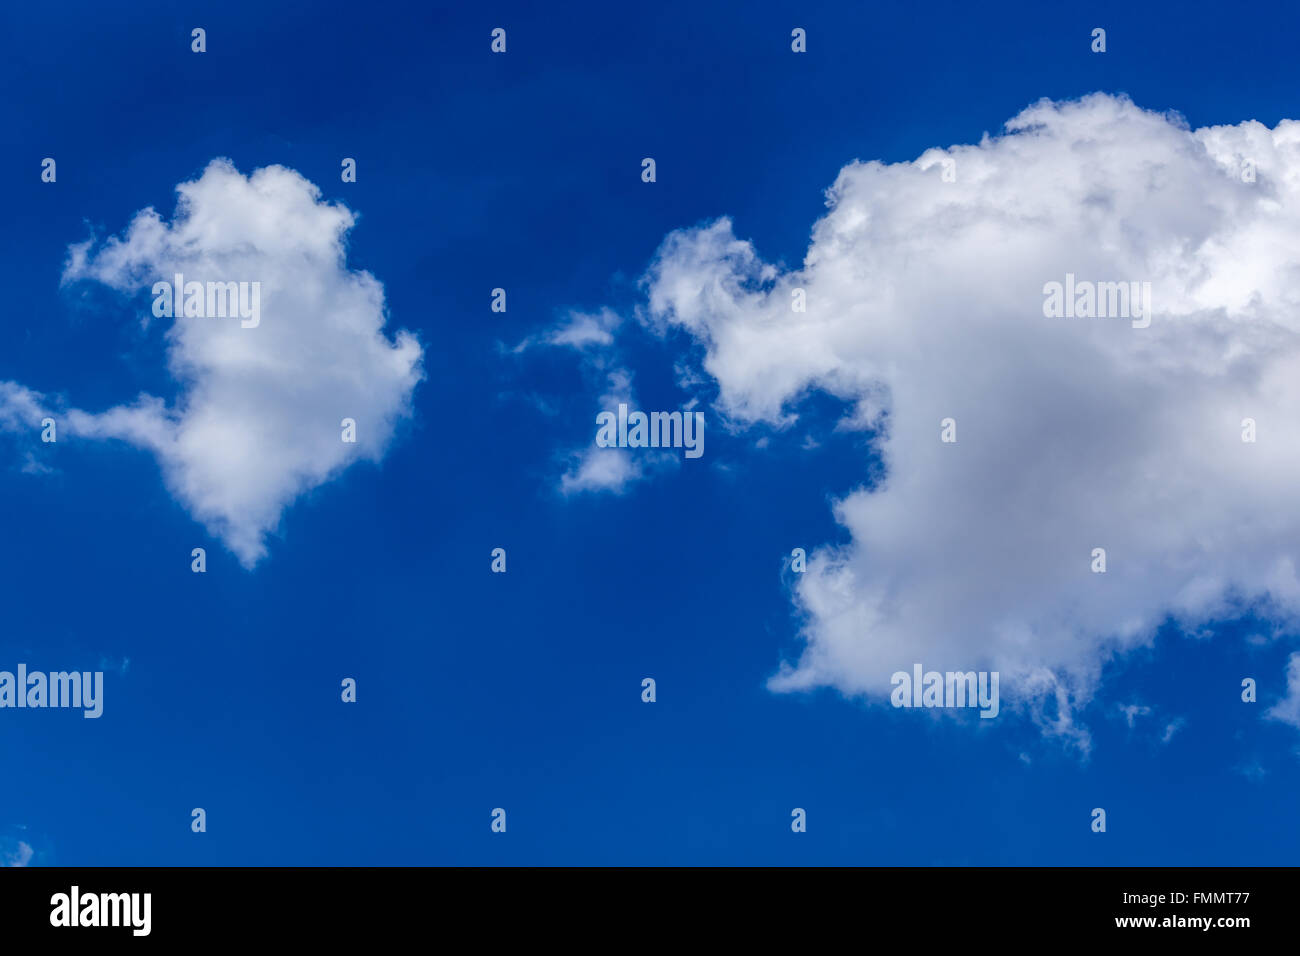 Isolated white fluffy clouds in blue sky Stock Photo